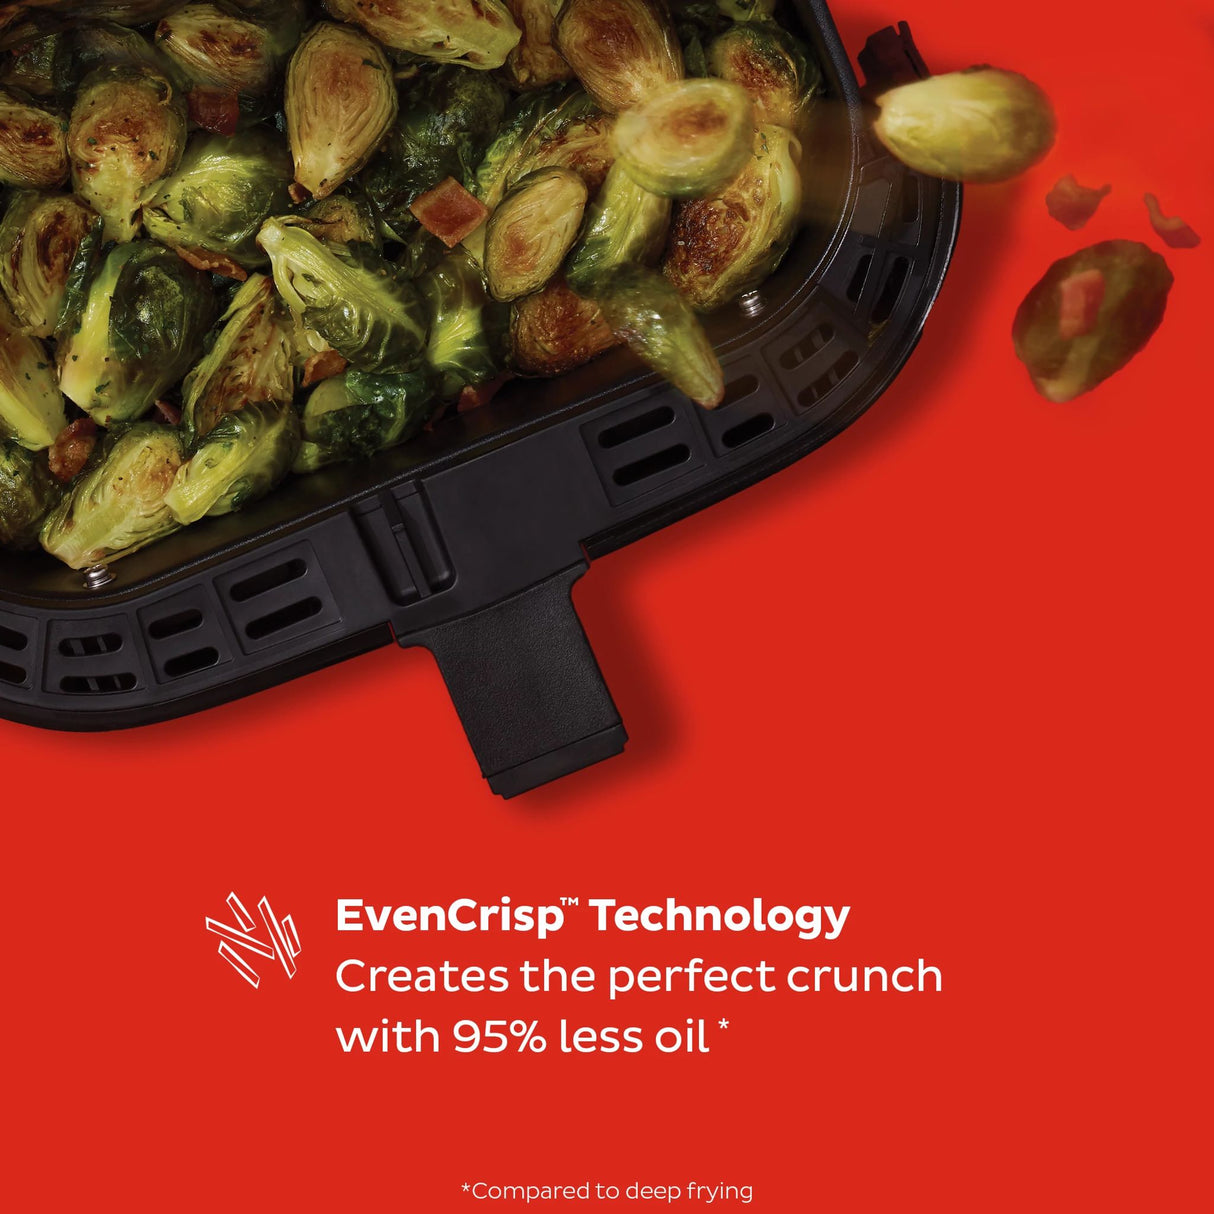  Vortex Plus 6-quart ClearCook Air Fryer with text EvenCrisp Technology - Creates the perfect crunch with 95% less oil